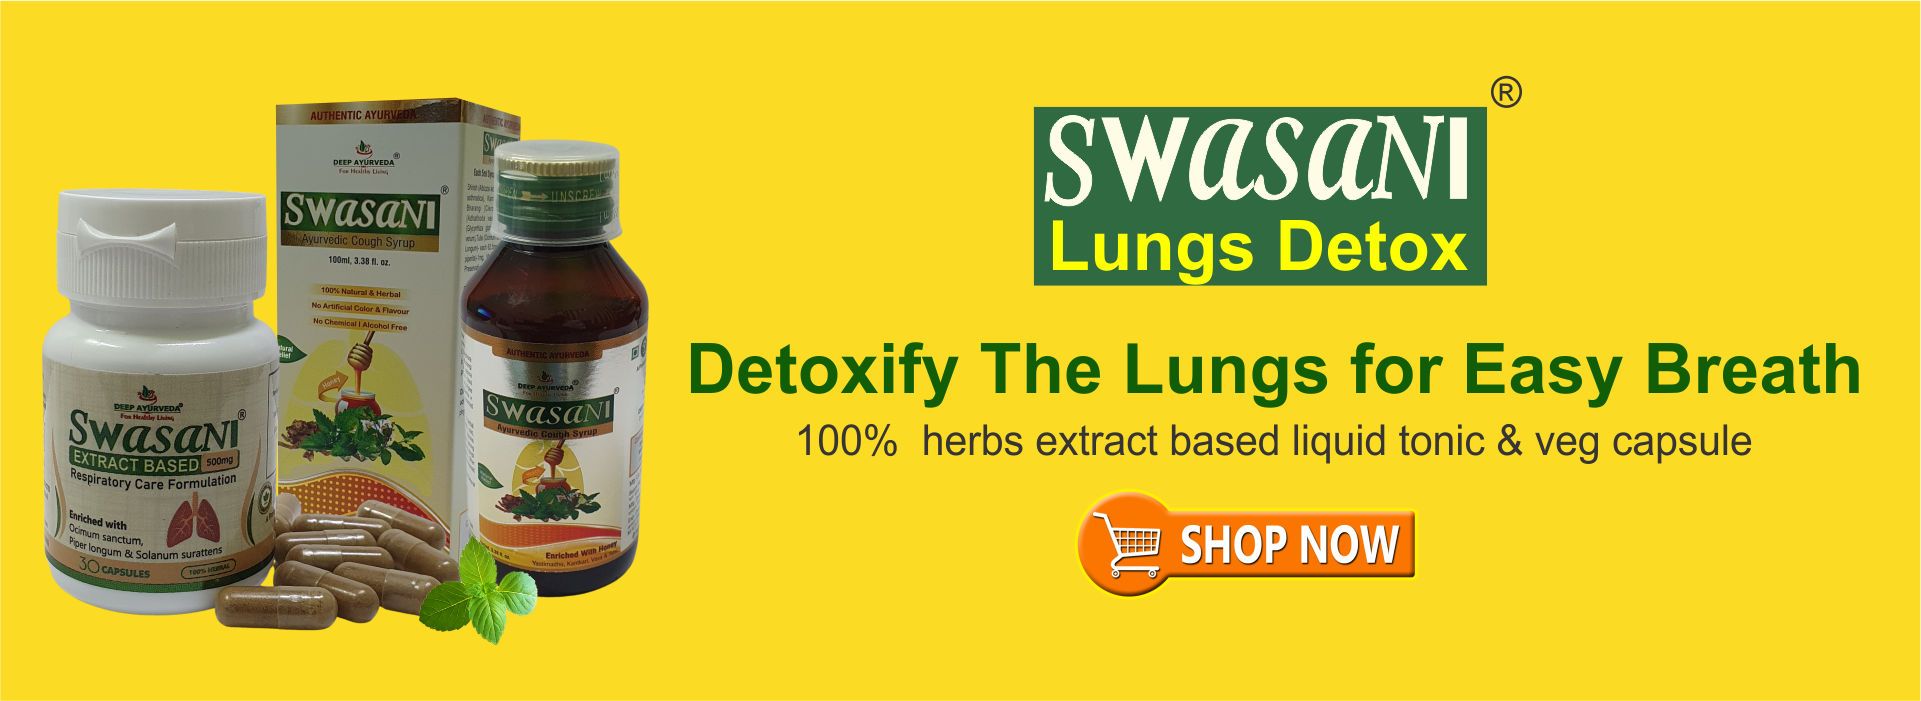 swasani lungs detox formula | natural remedy for respiratory care | remove smoking tar | pack of 2 products